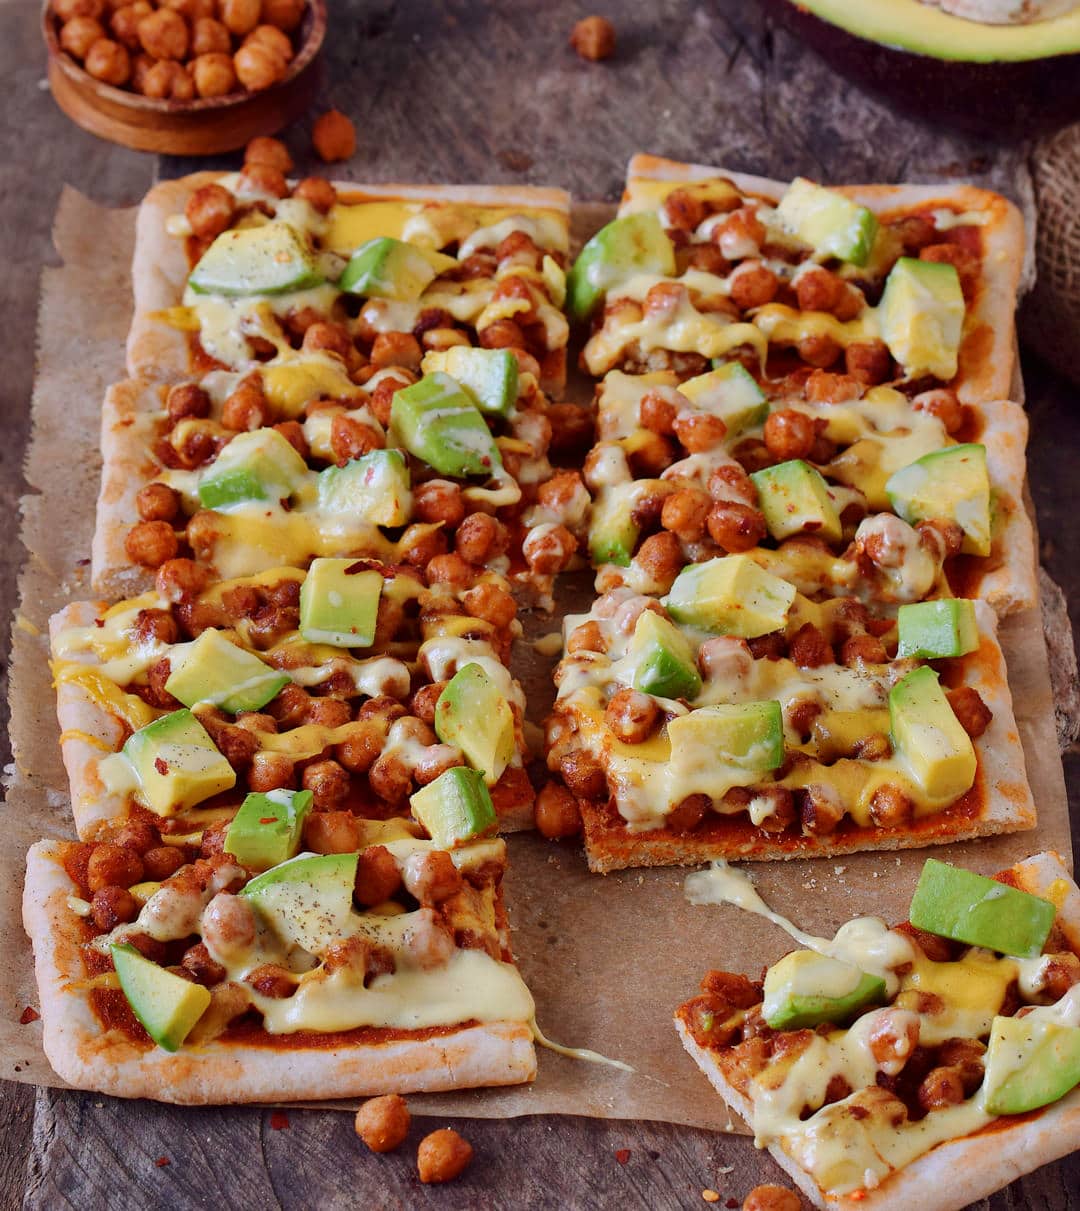 Avocado chickpea pizza with vegan cheese! This pizza is gluten-free, plant-based, contains healthy protein, fat, and carbs. Easy recipe which is perfect for lunch or dinner, especially on weekends.